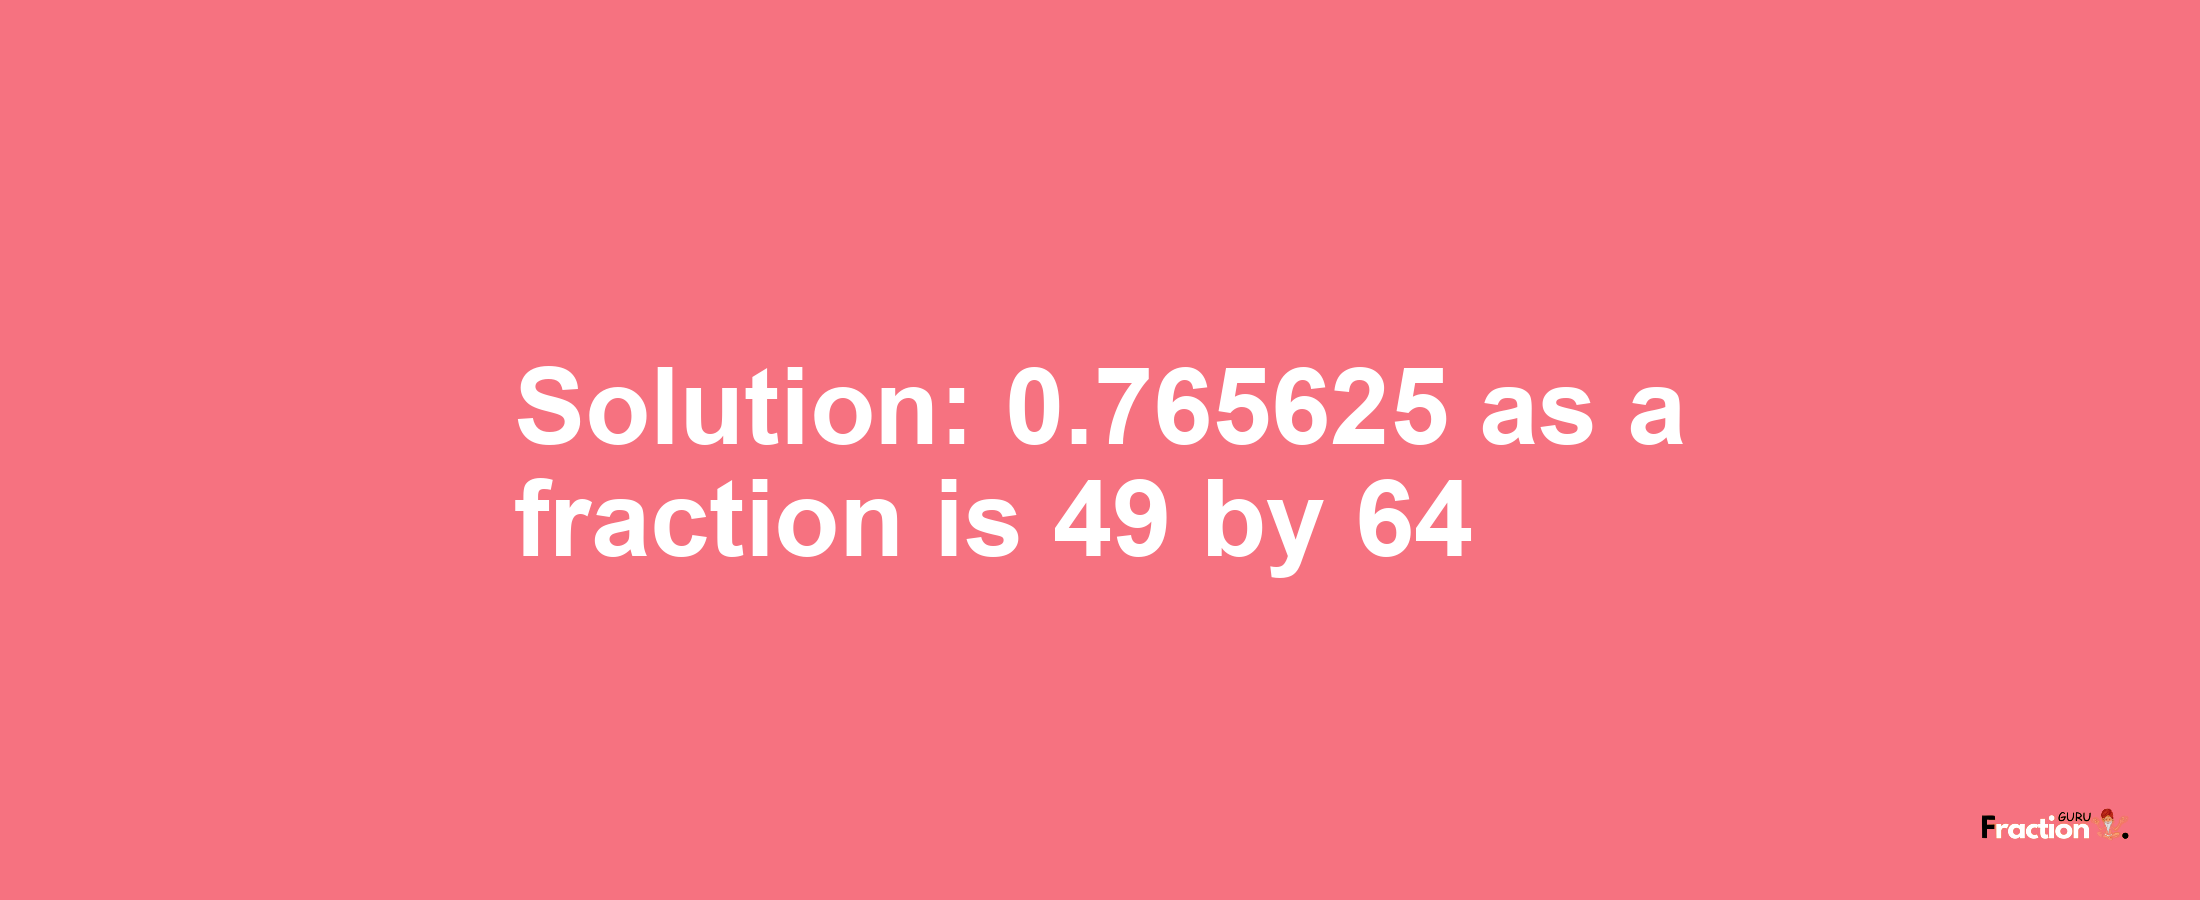 Solution:0.765625 as a fraction is 49/64